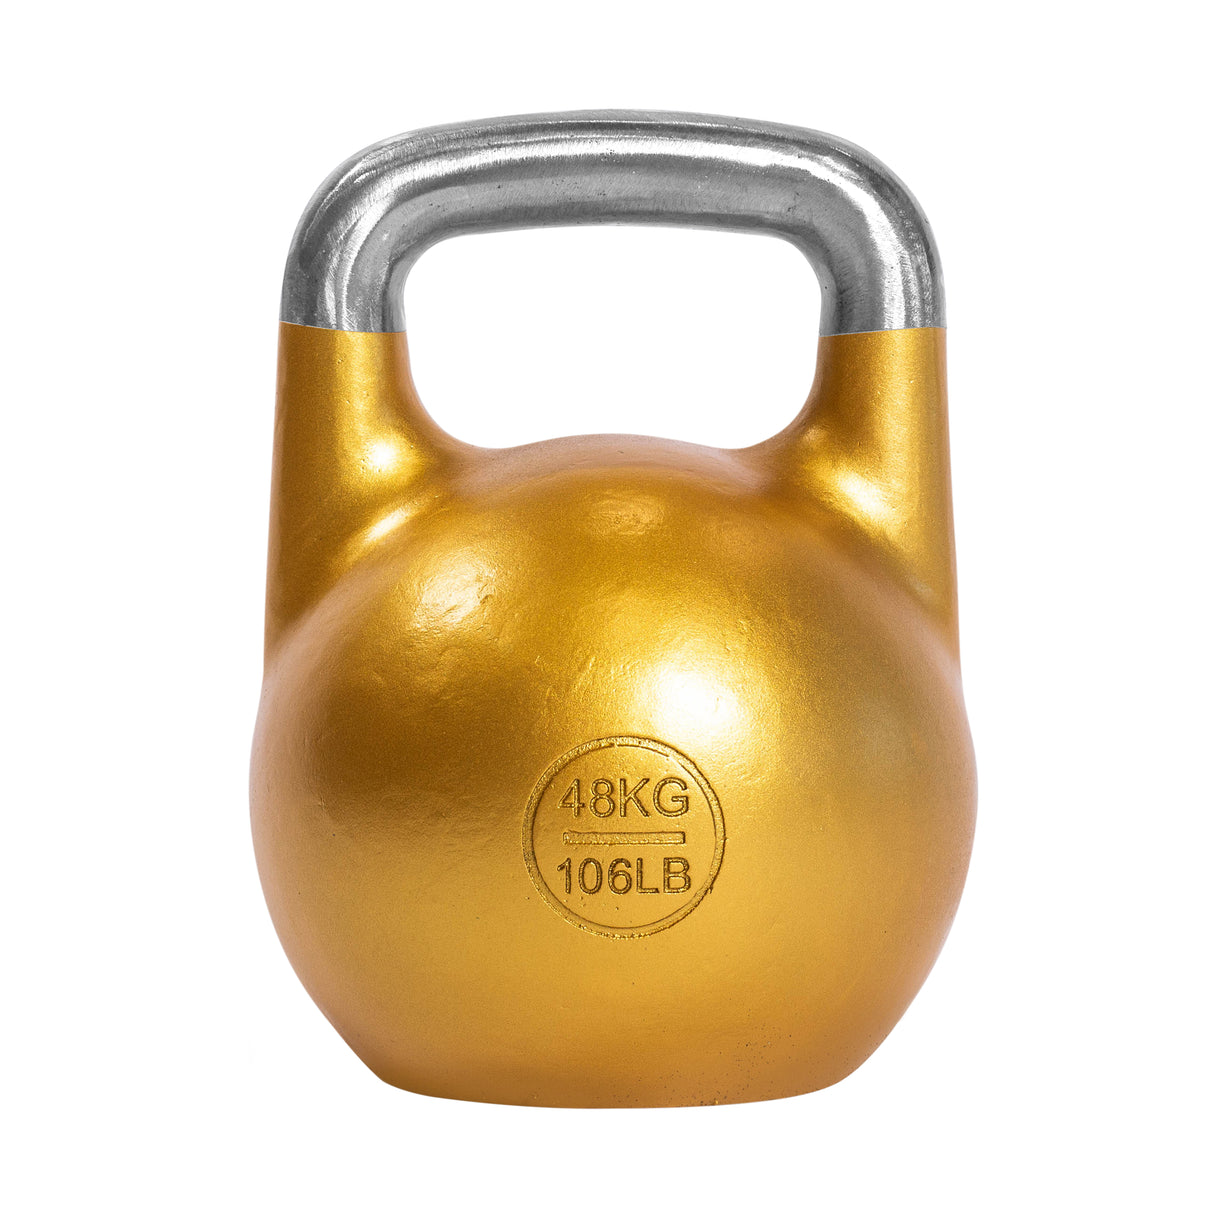 48 KG Competition Kettlebell